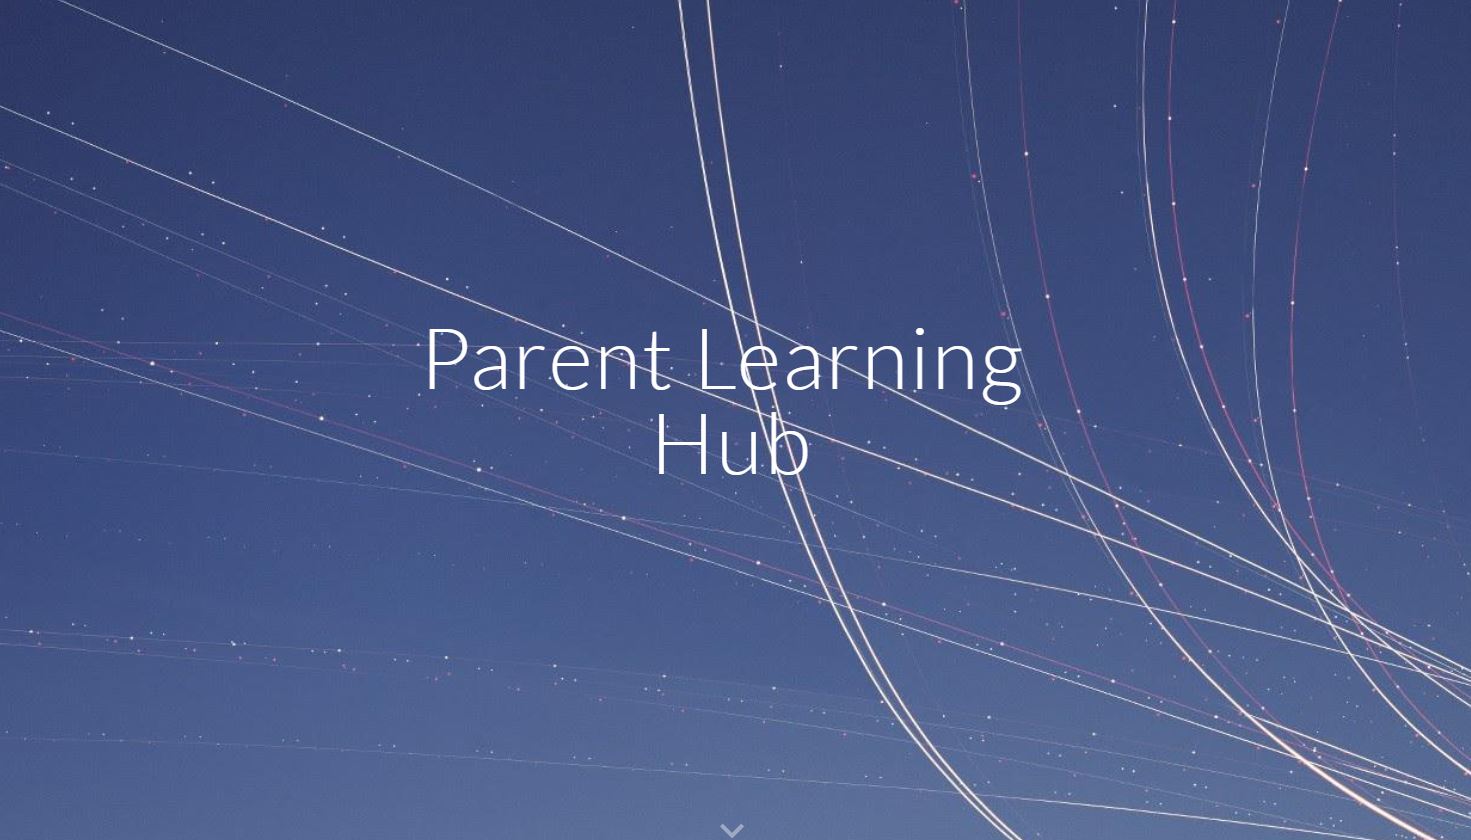 Aberdeen’s Digital Learning Hub for Parents and Carers